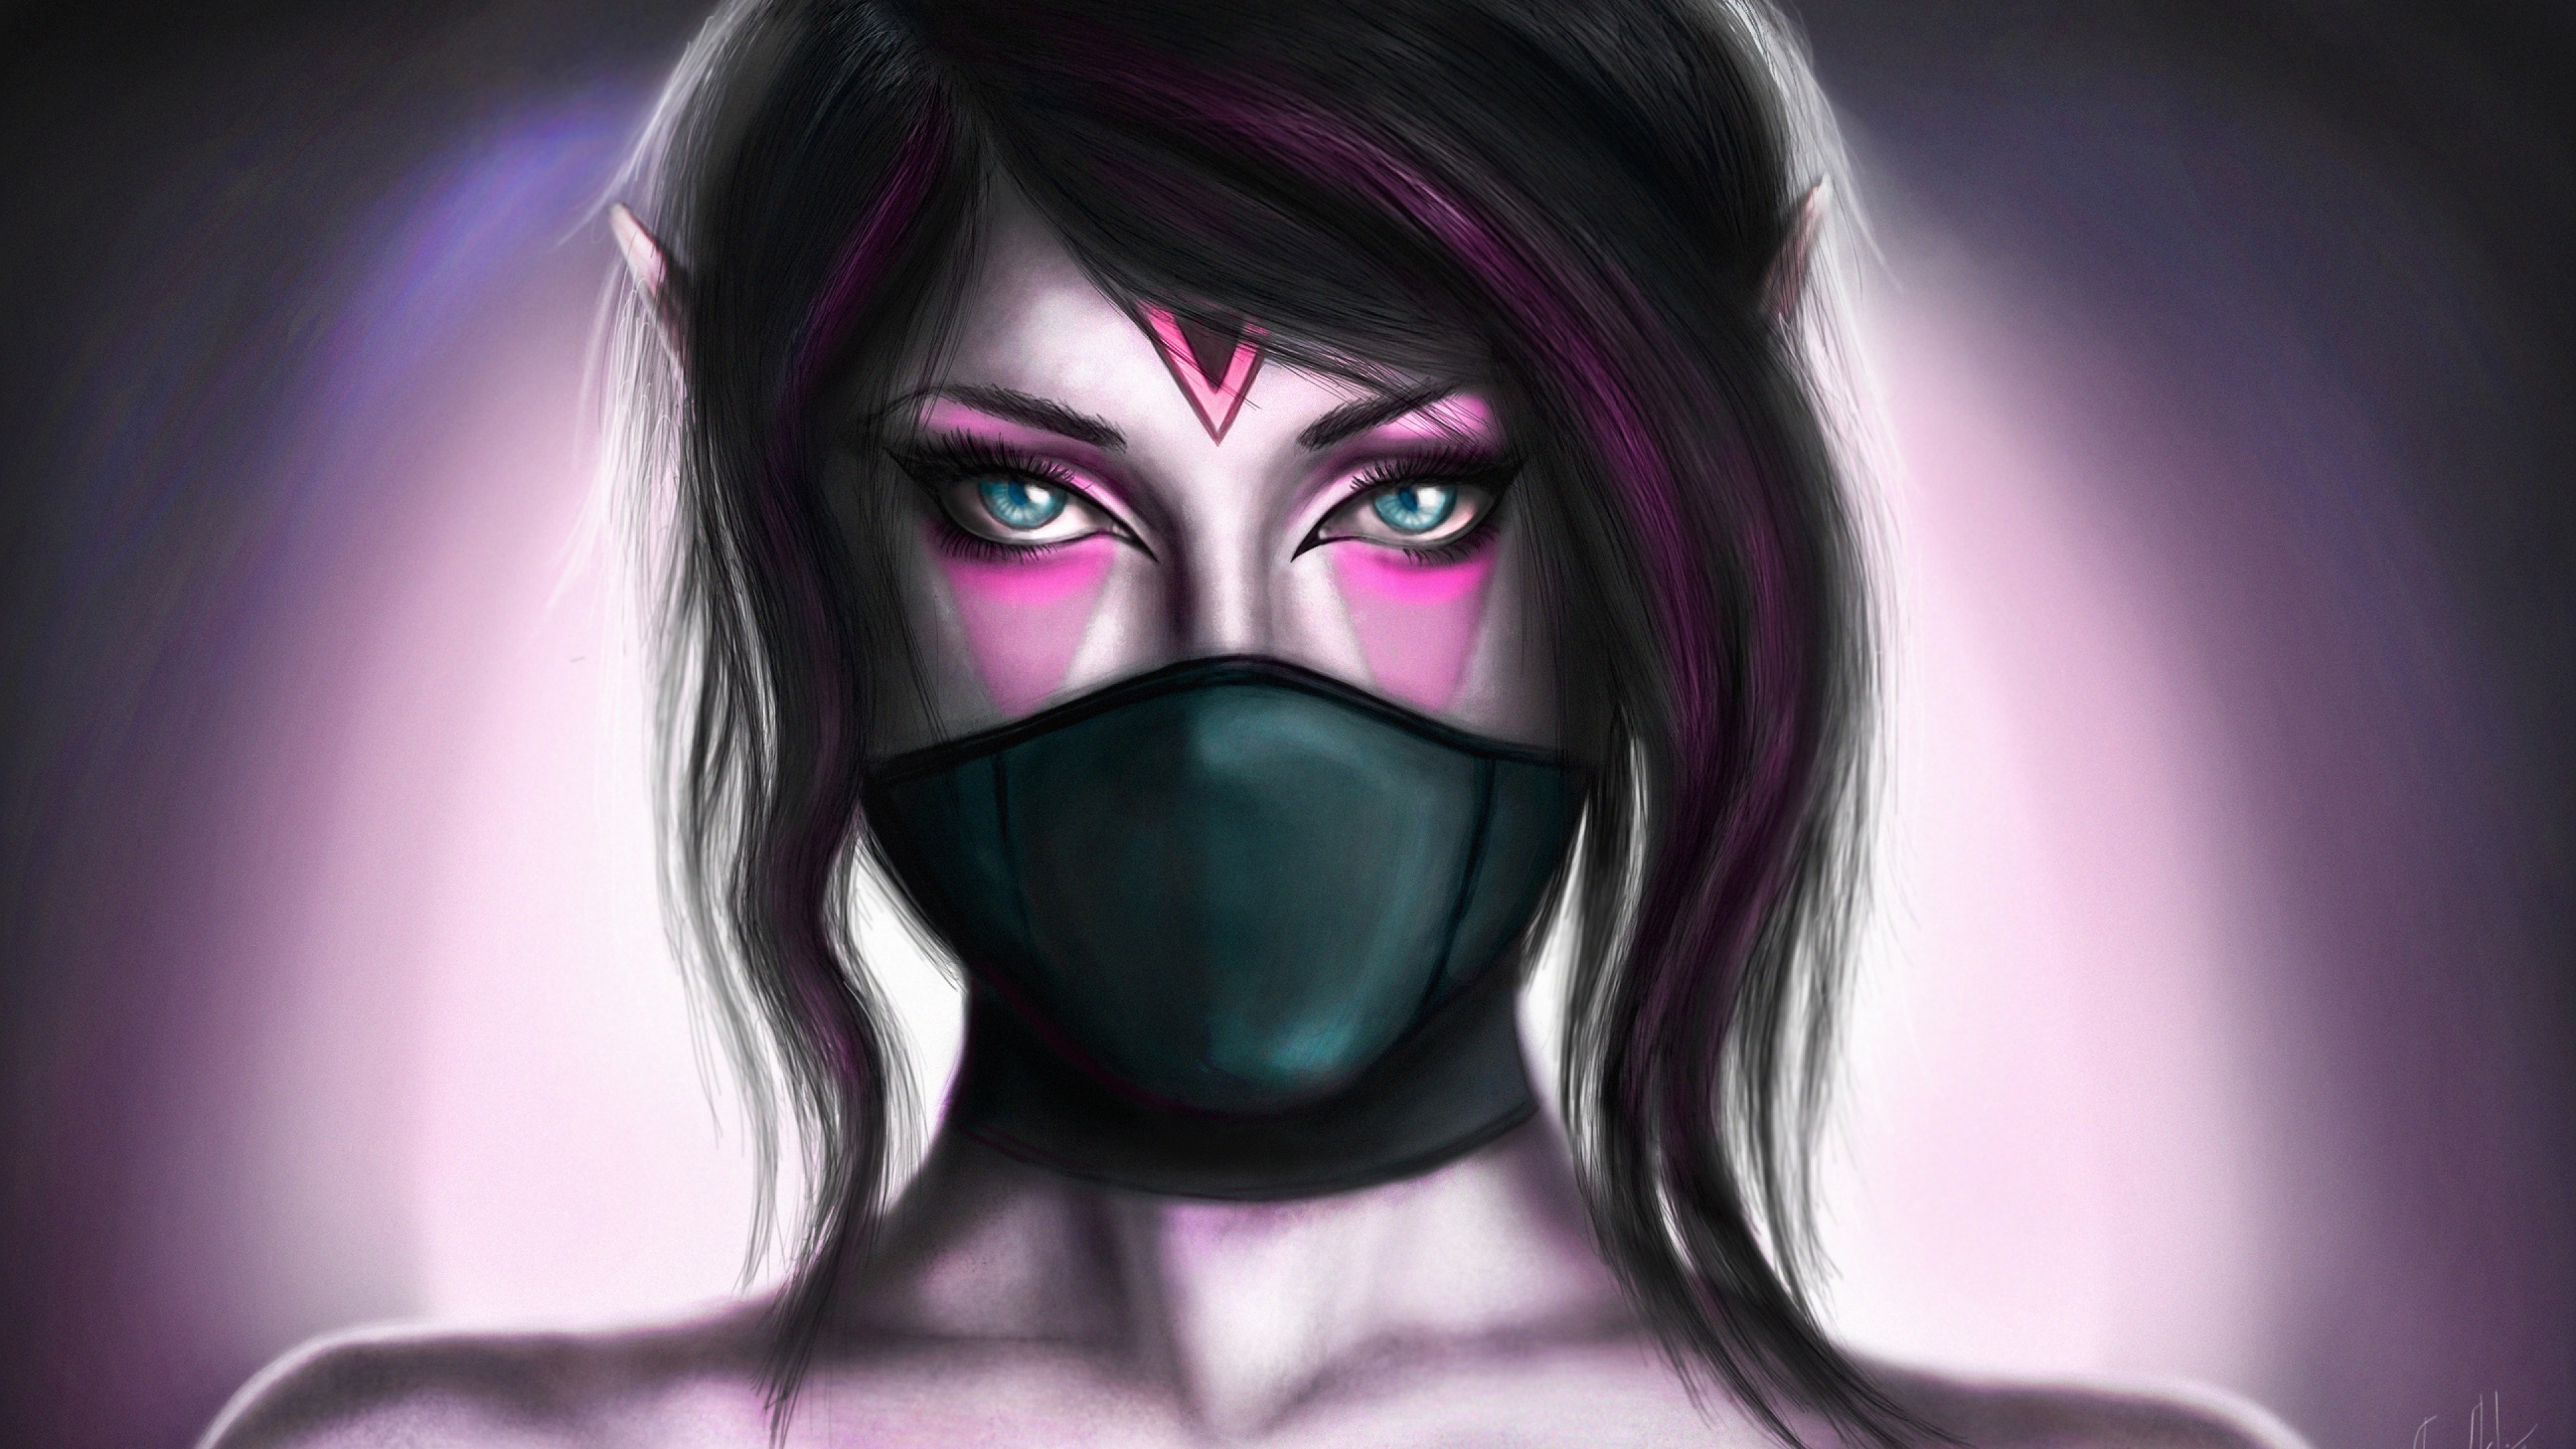 dota 2 wallpapers hd,face,purple,violet,head,nose